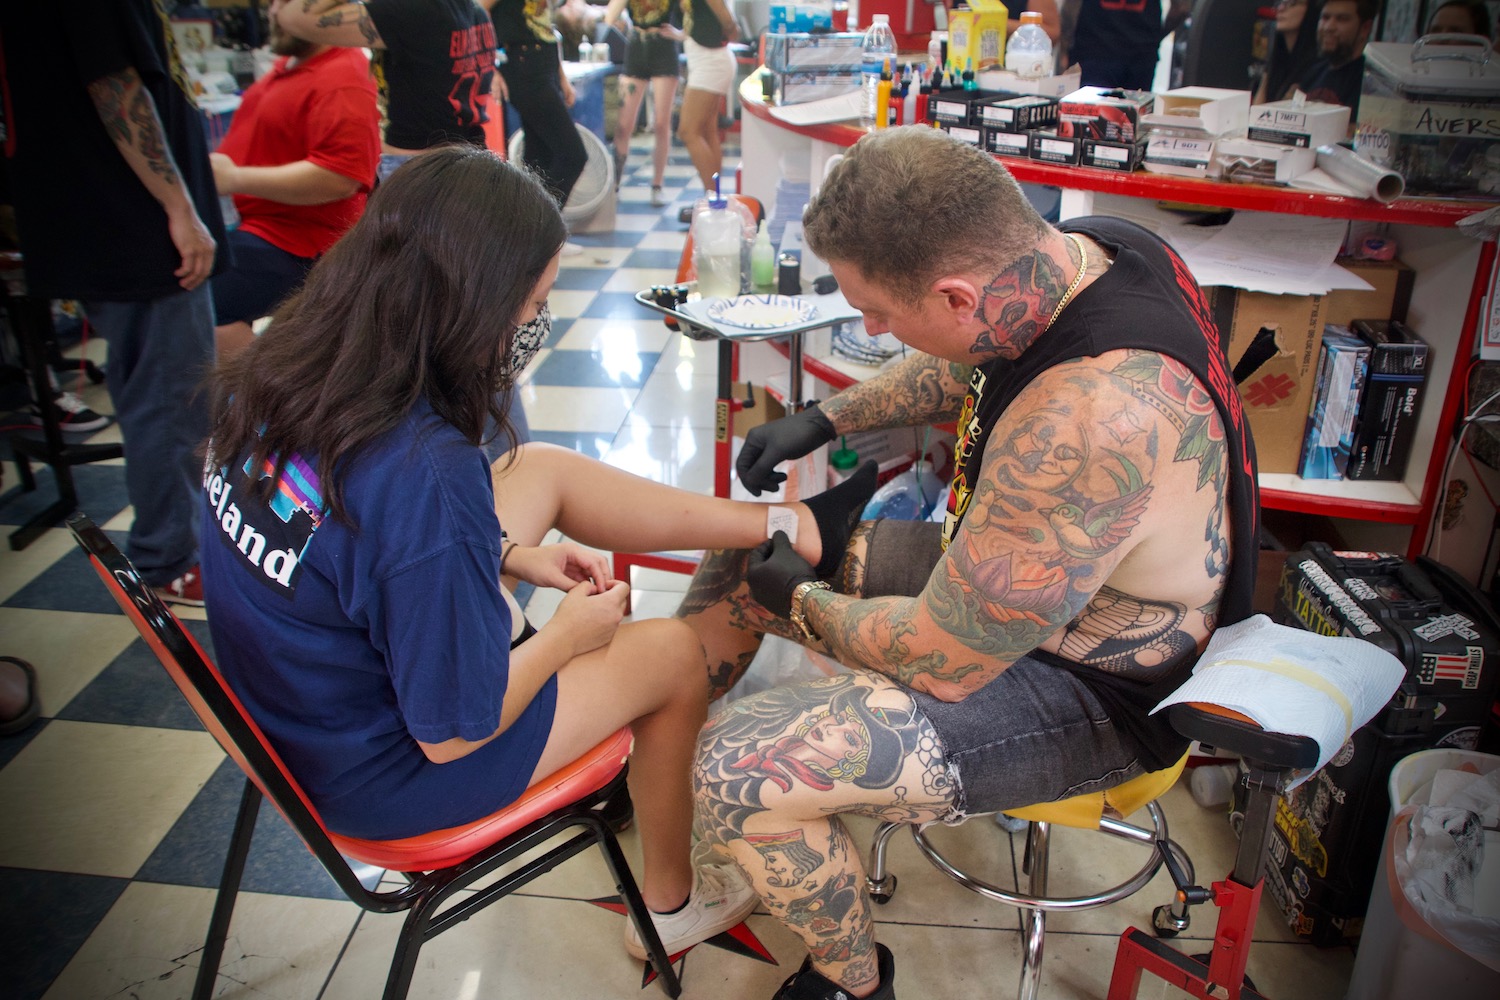 Elm Street Tattoo Keeps Up Traditions In Spite Of Loss. | Central Track